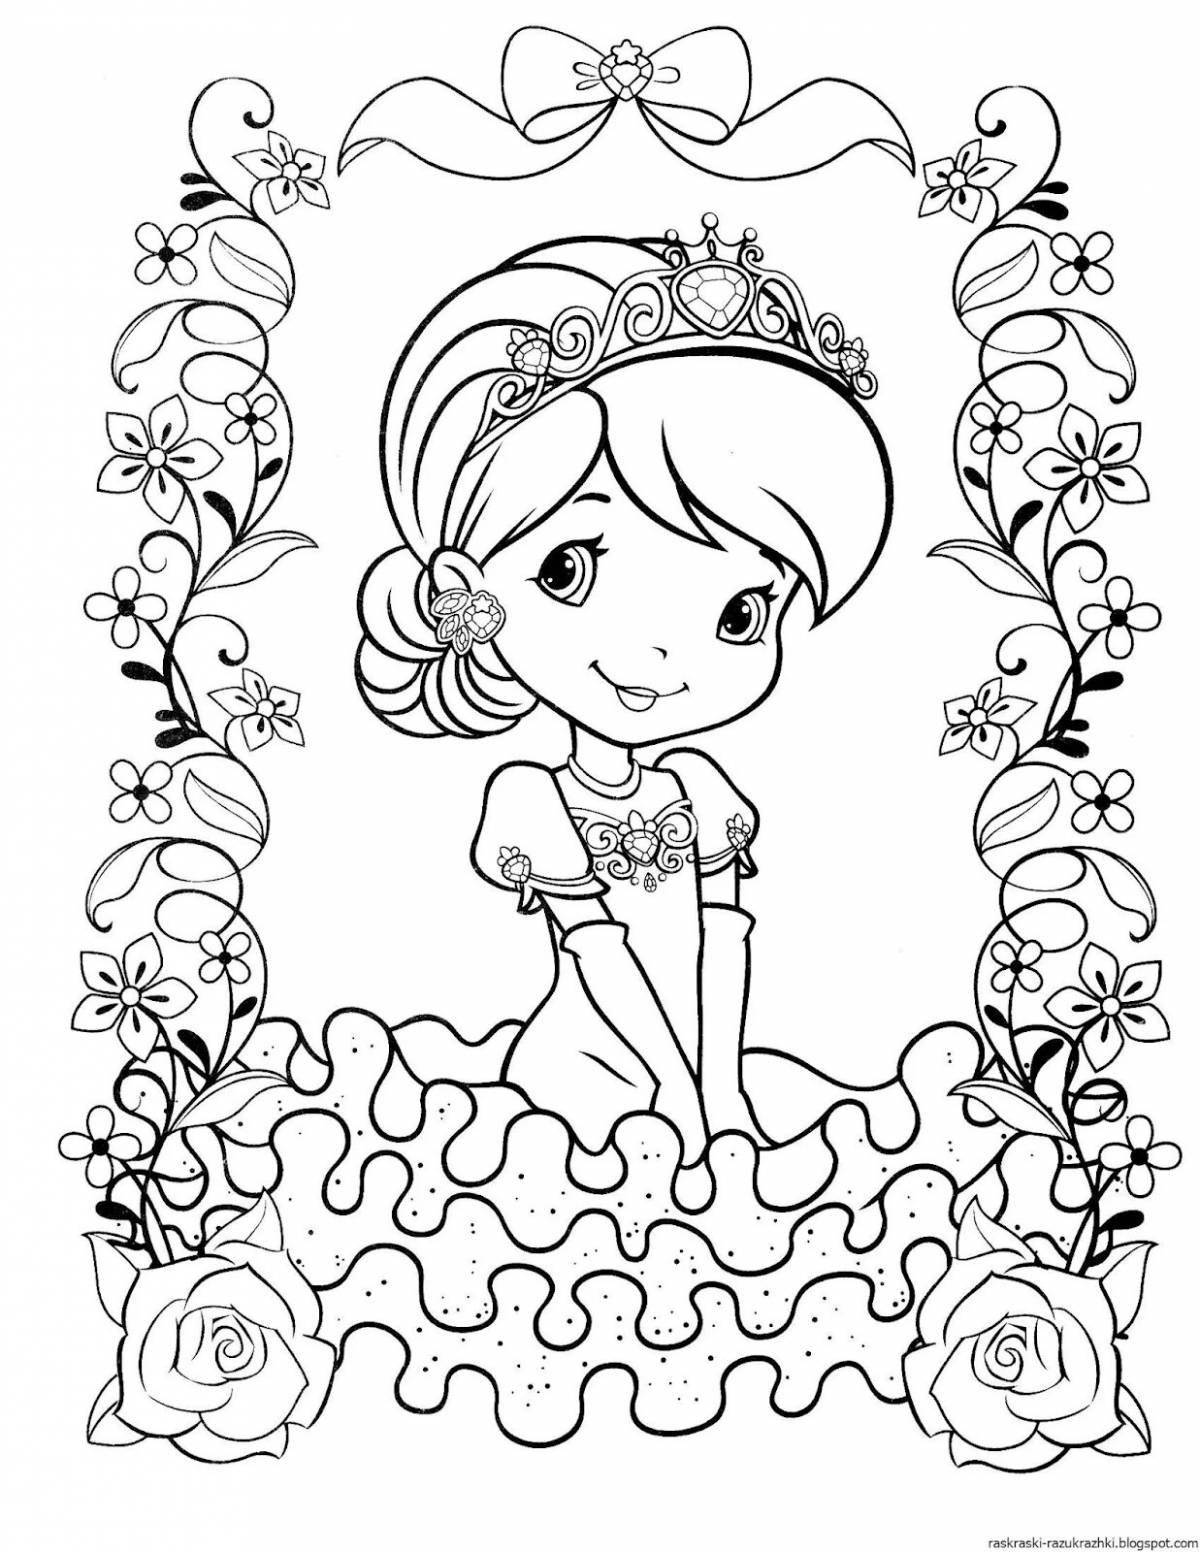 Coloring pages for girls new